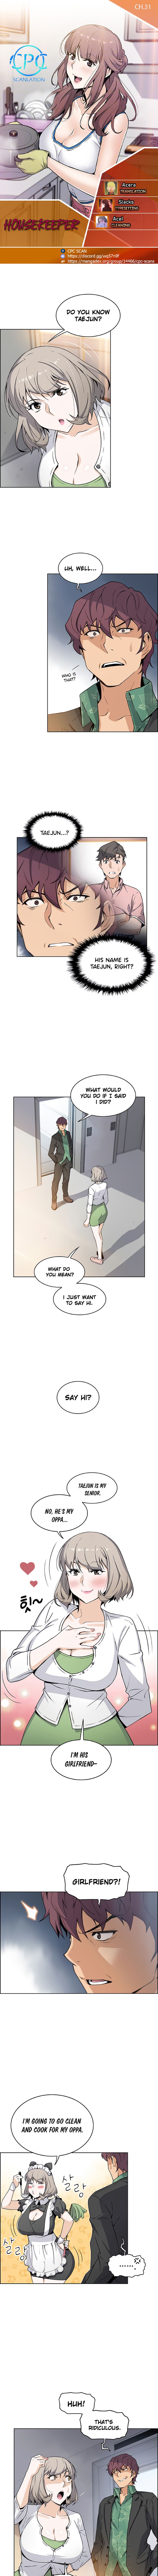 Housekeeper Manhwa - Chapter 31 Page 1